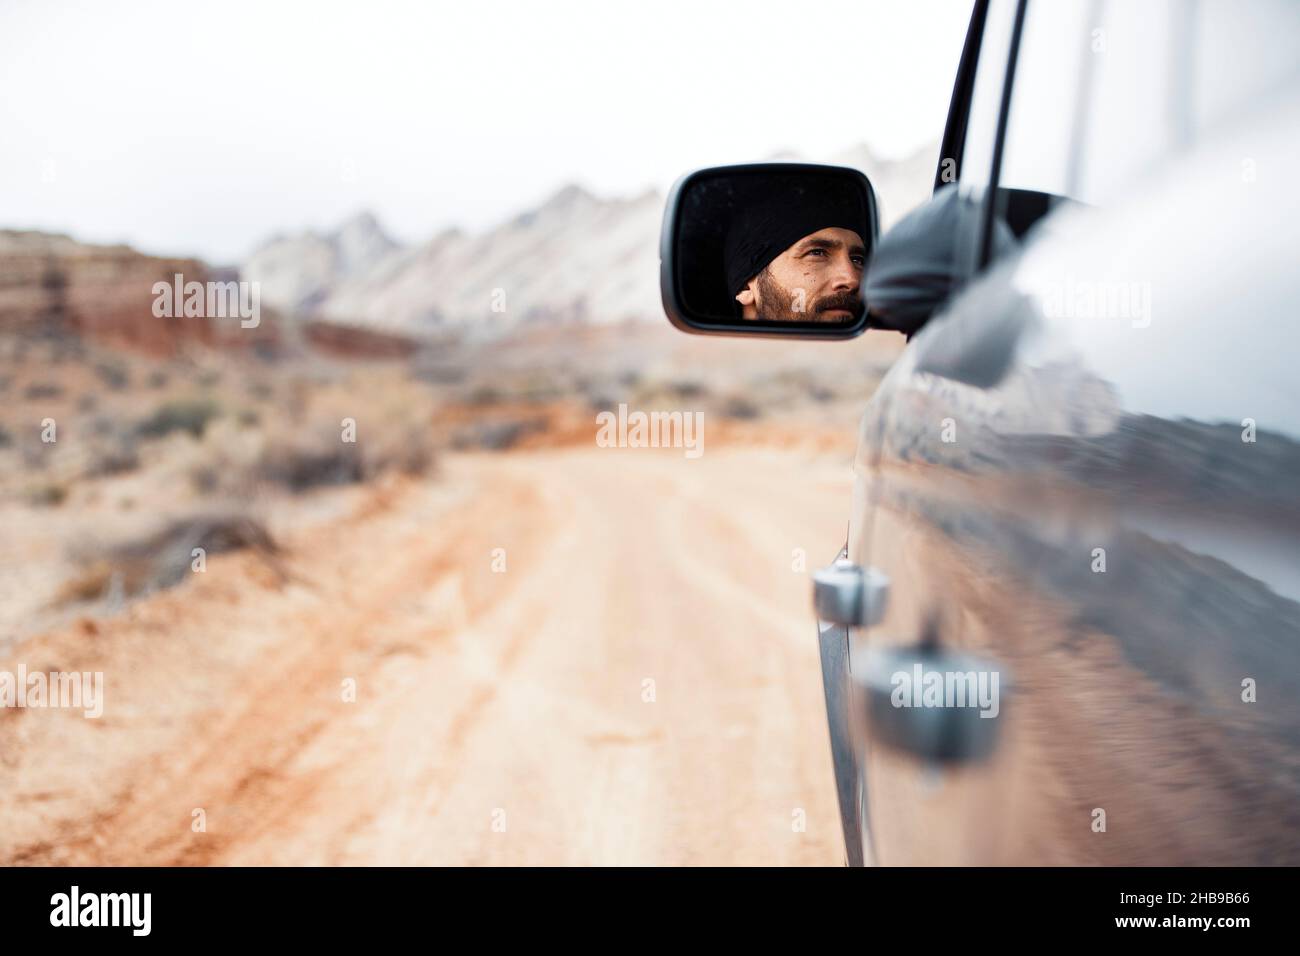 Man driving in Utah, facial view from side mirror Stock Photo